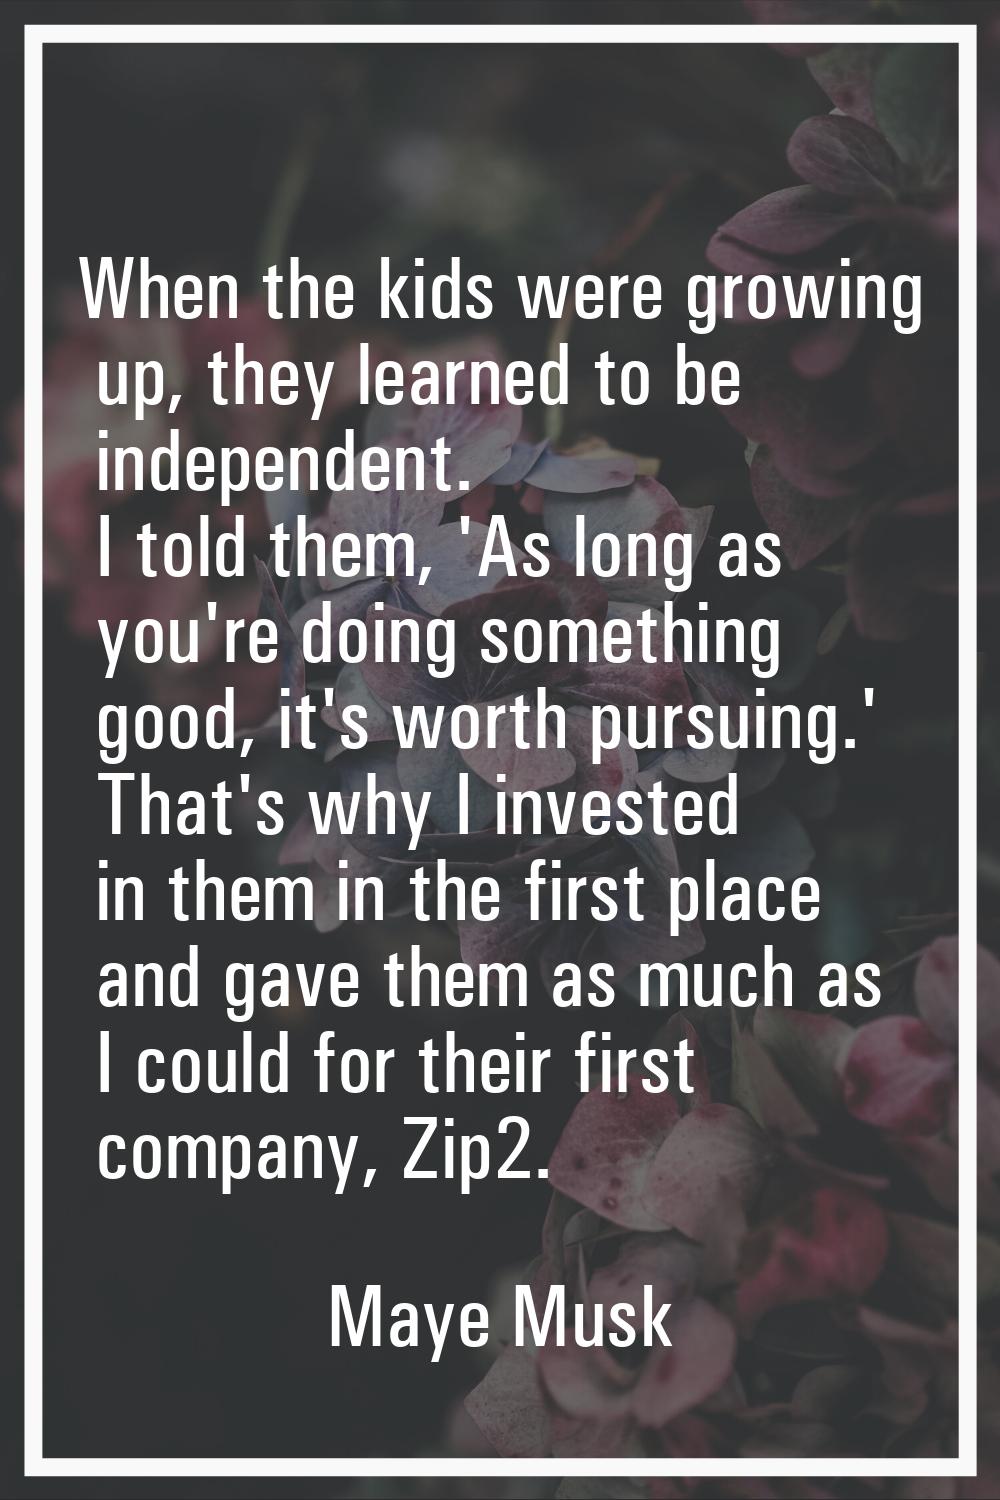 When the kids were growing up, they learned to be independent. I told them, 'As long as you're doin